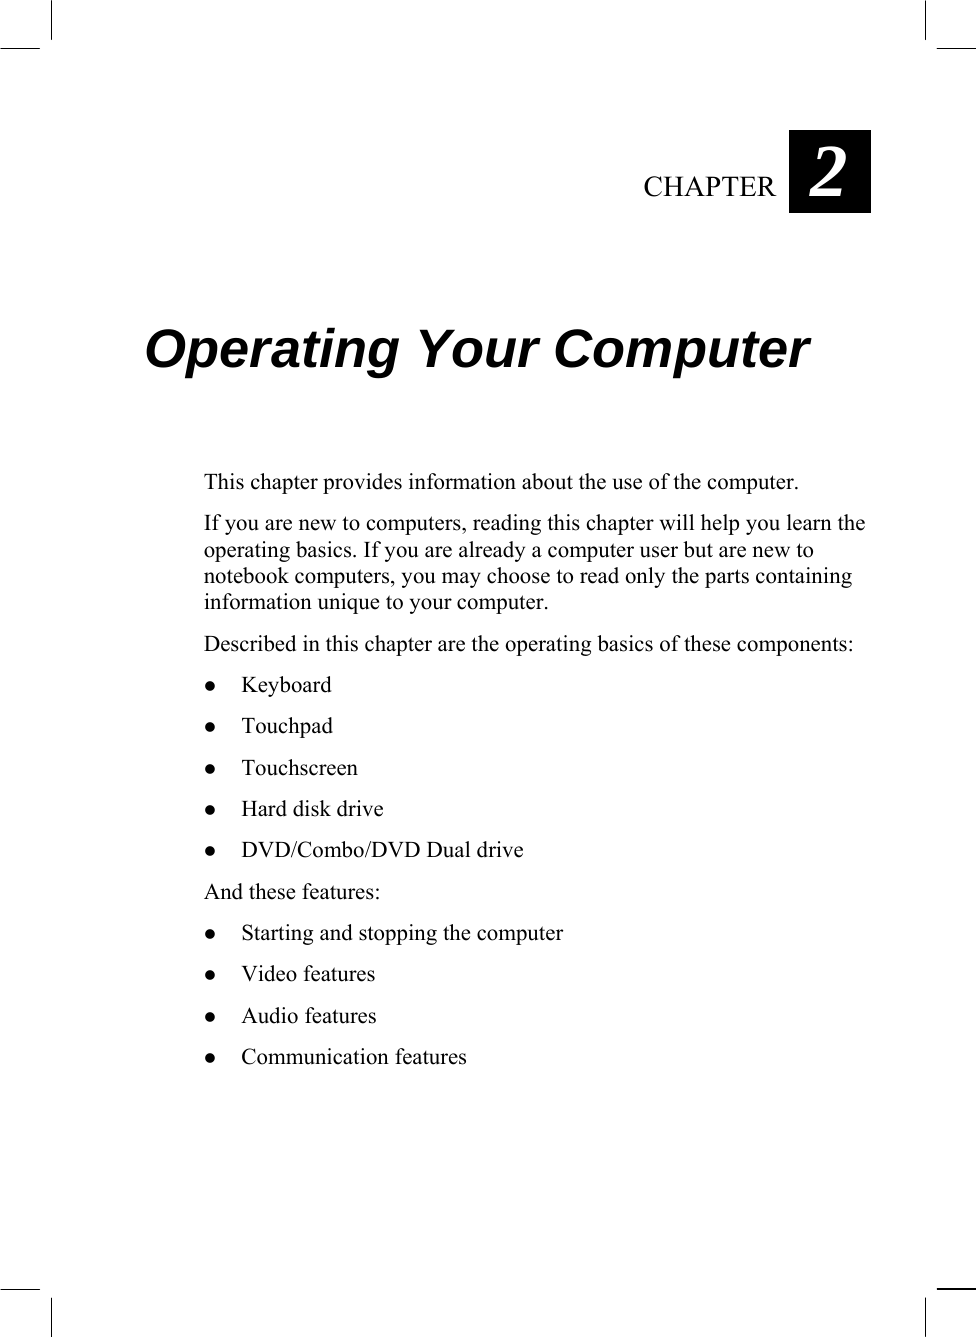   CHAPTER  2 Operating Your Computer This chapter provides information about the use of the computer. If you are new to computers, reading this chapter will help you learn the operating basics. If you are already a computer user but are new to notebook computers, you may choose to read only the parts containing information unique to your computer. Described in this chapter are the operating basics of these components:   Keyboard   Touchpad   Touchscreen   Hard disk drive   DVD/Combo/DVD Dual drive And these features:   Starting and stopping the computer   Video features   Audio features   Communication features  